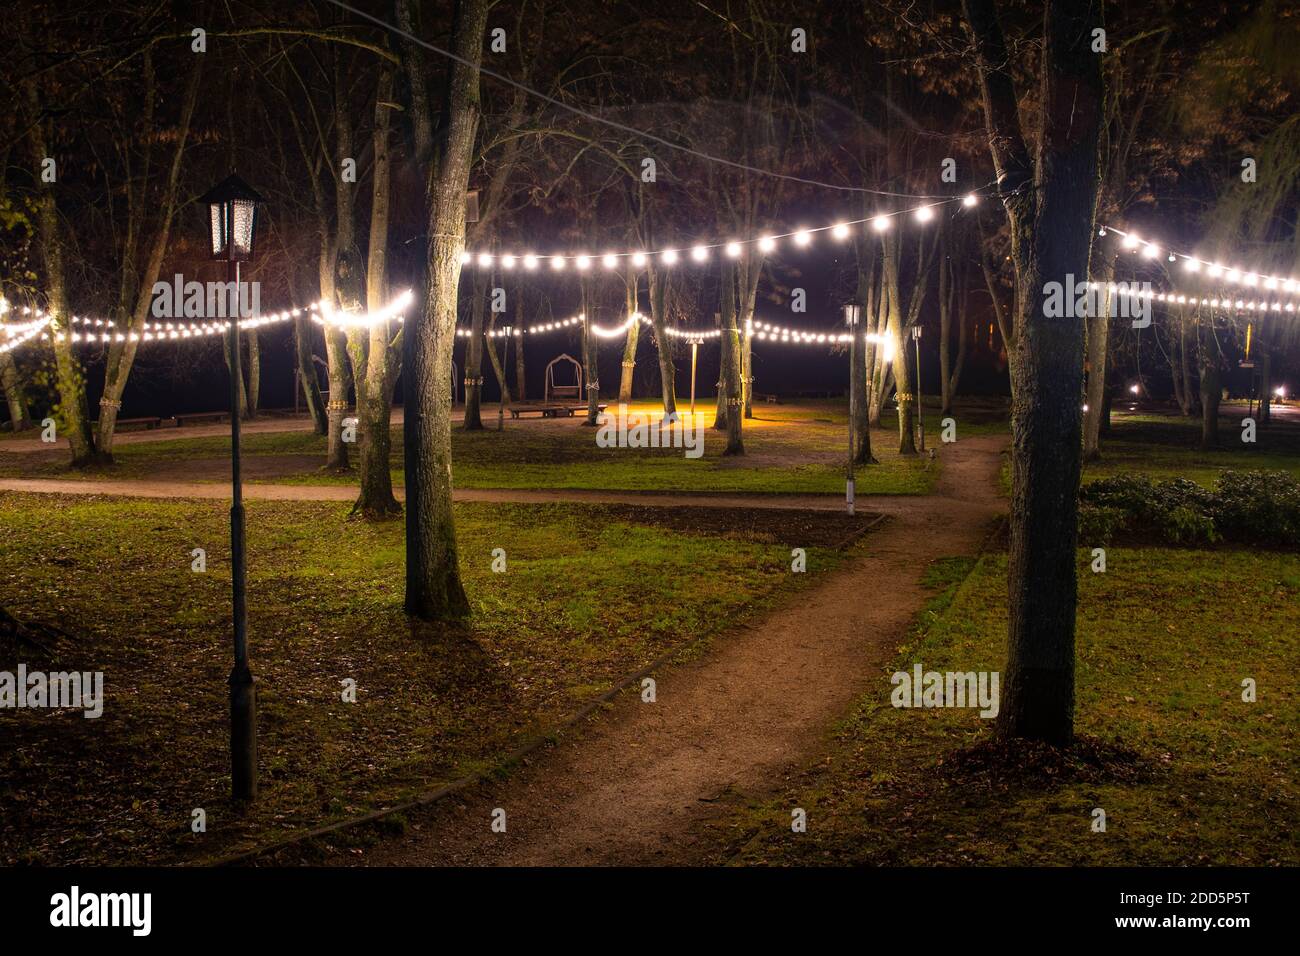 Park or garden with warm light bulbs, street lamps at evening or night, decorative illumination, celebration, cozy Christmas background Stock Photo